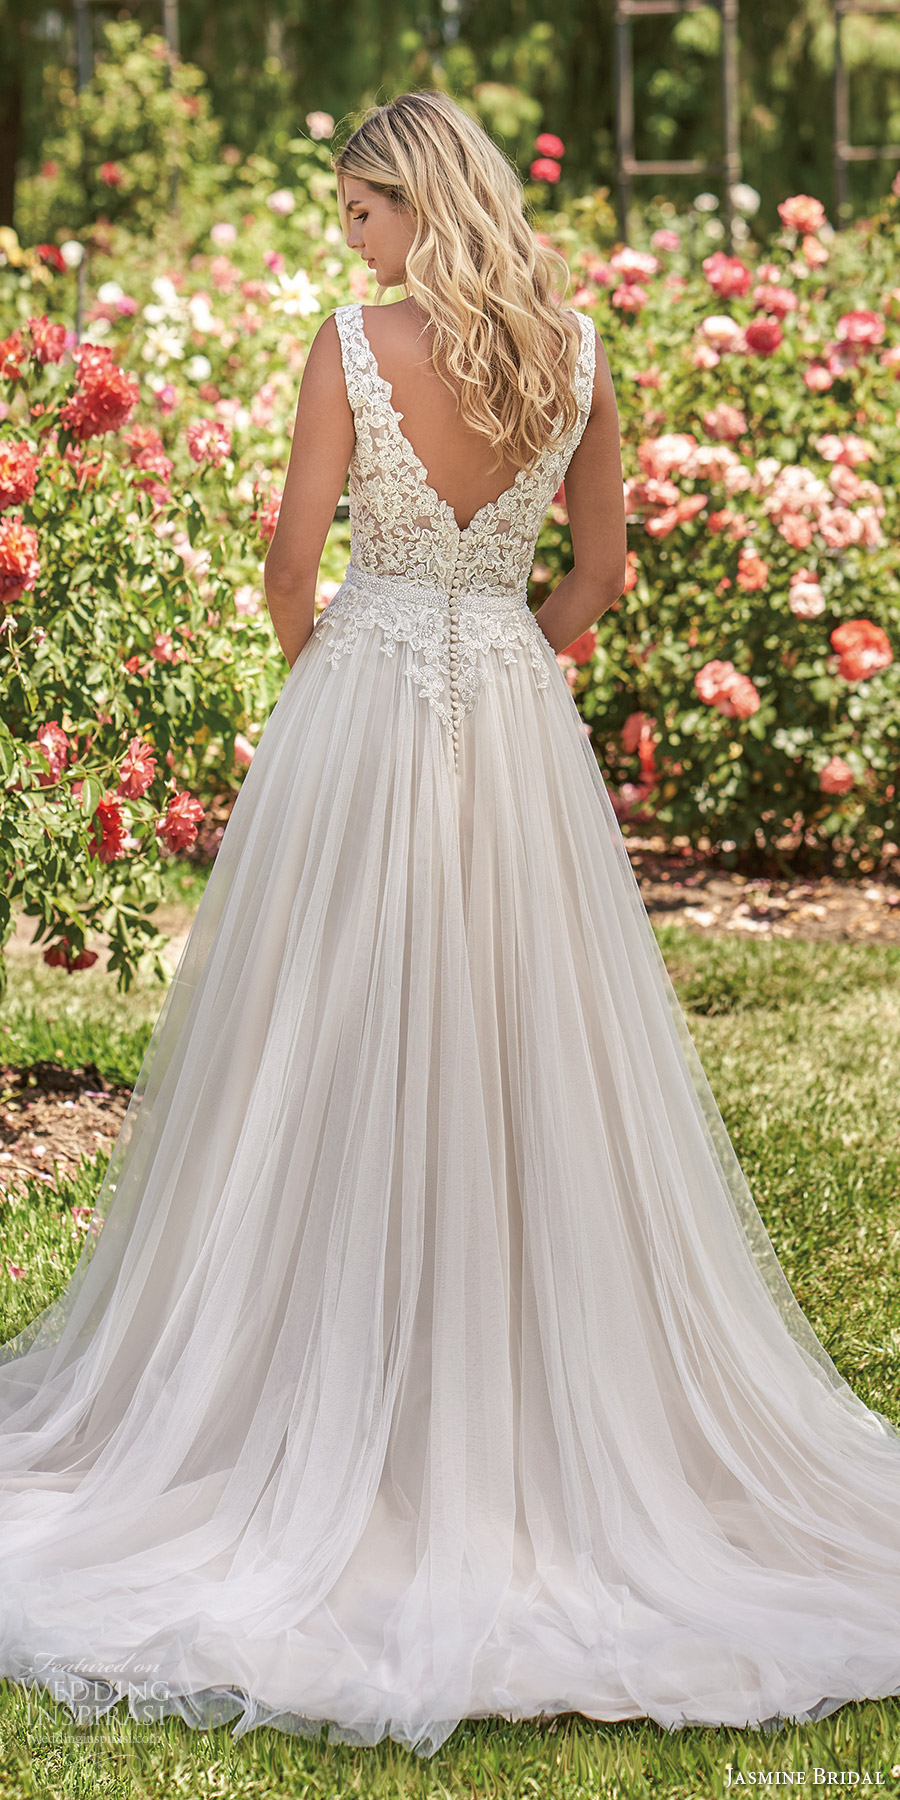 jasmine spring 2020 collection sleeveless thick straps v neckline embellished lace bodice a line ball gown wedding dress v back chapel train (6) bv